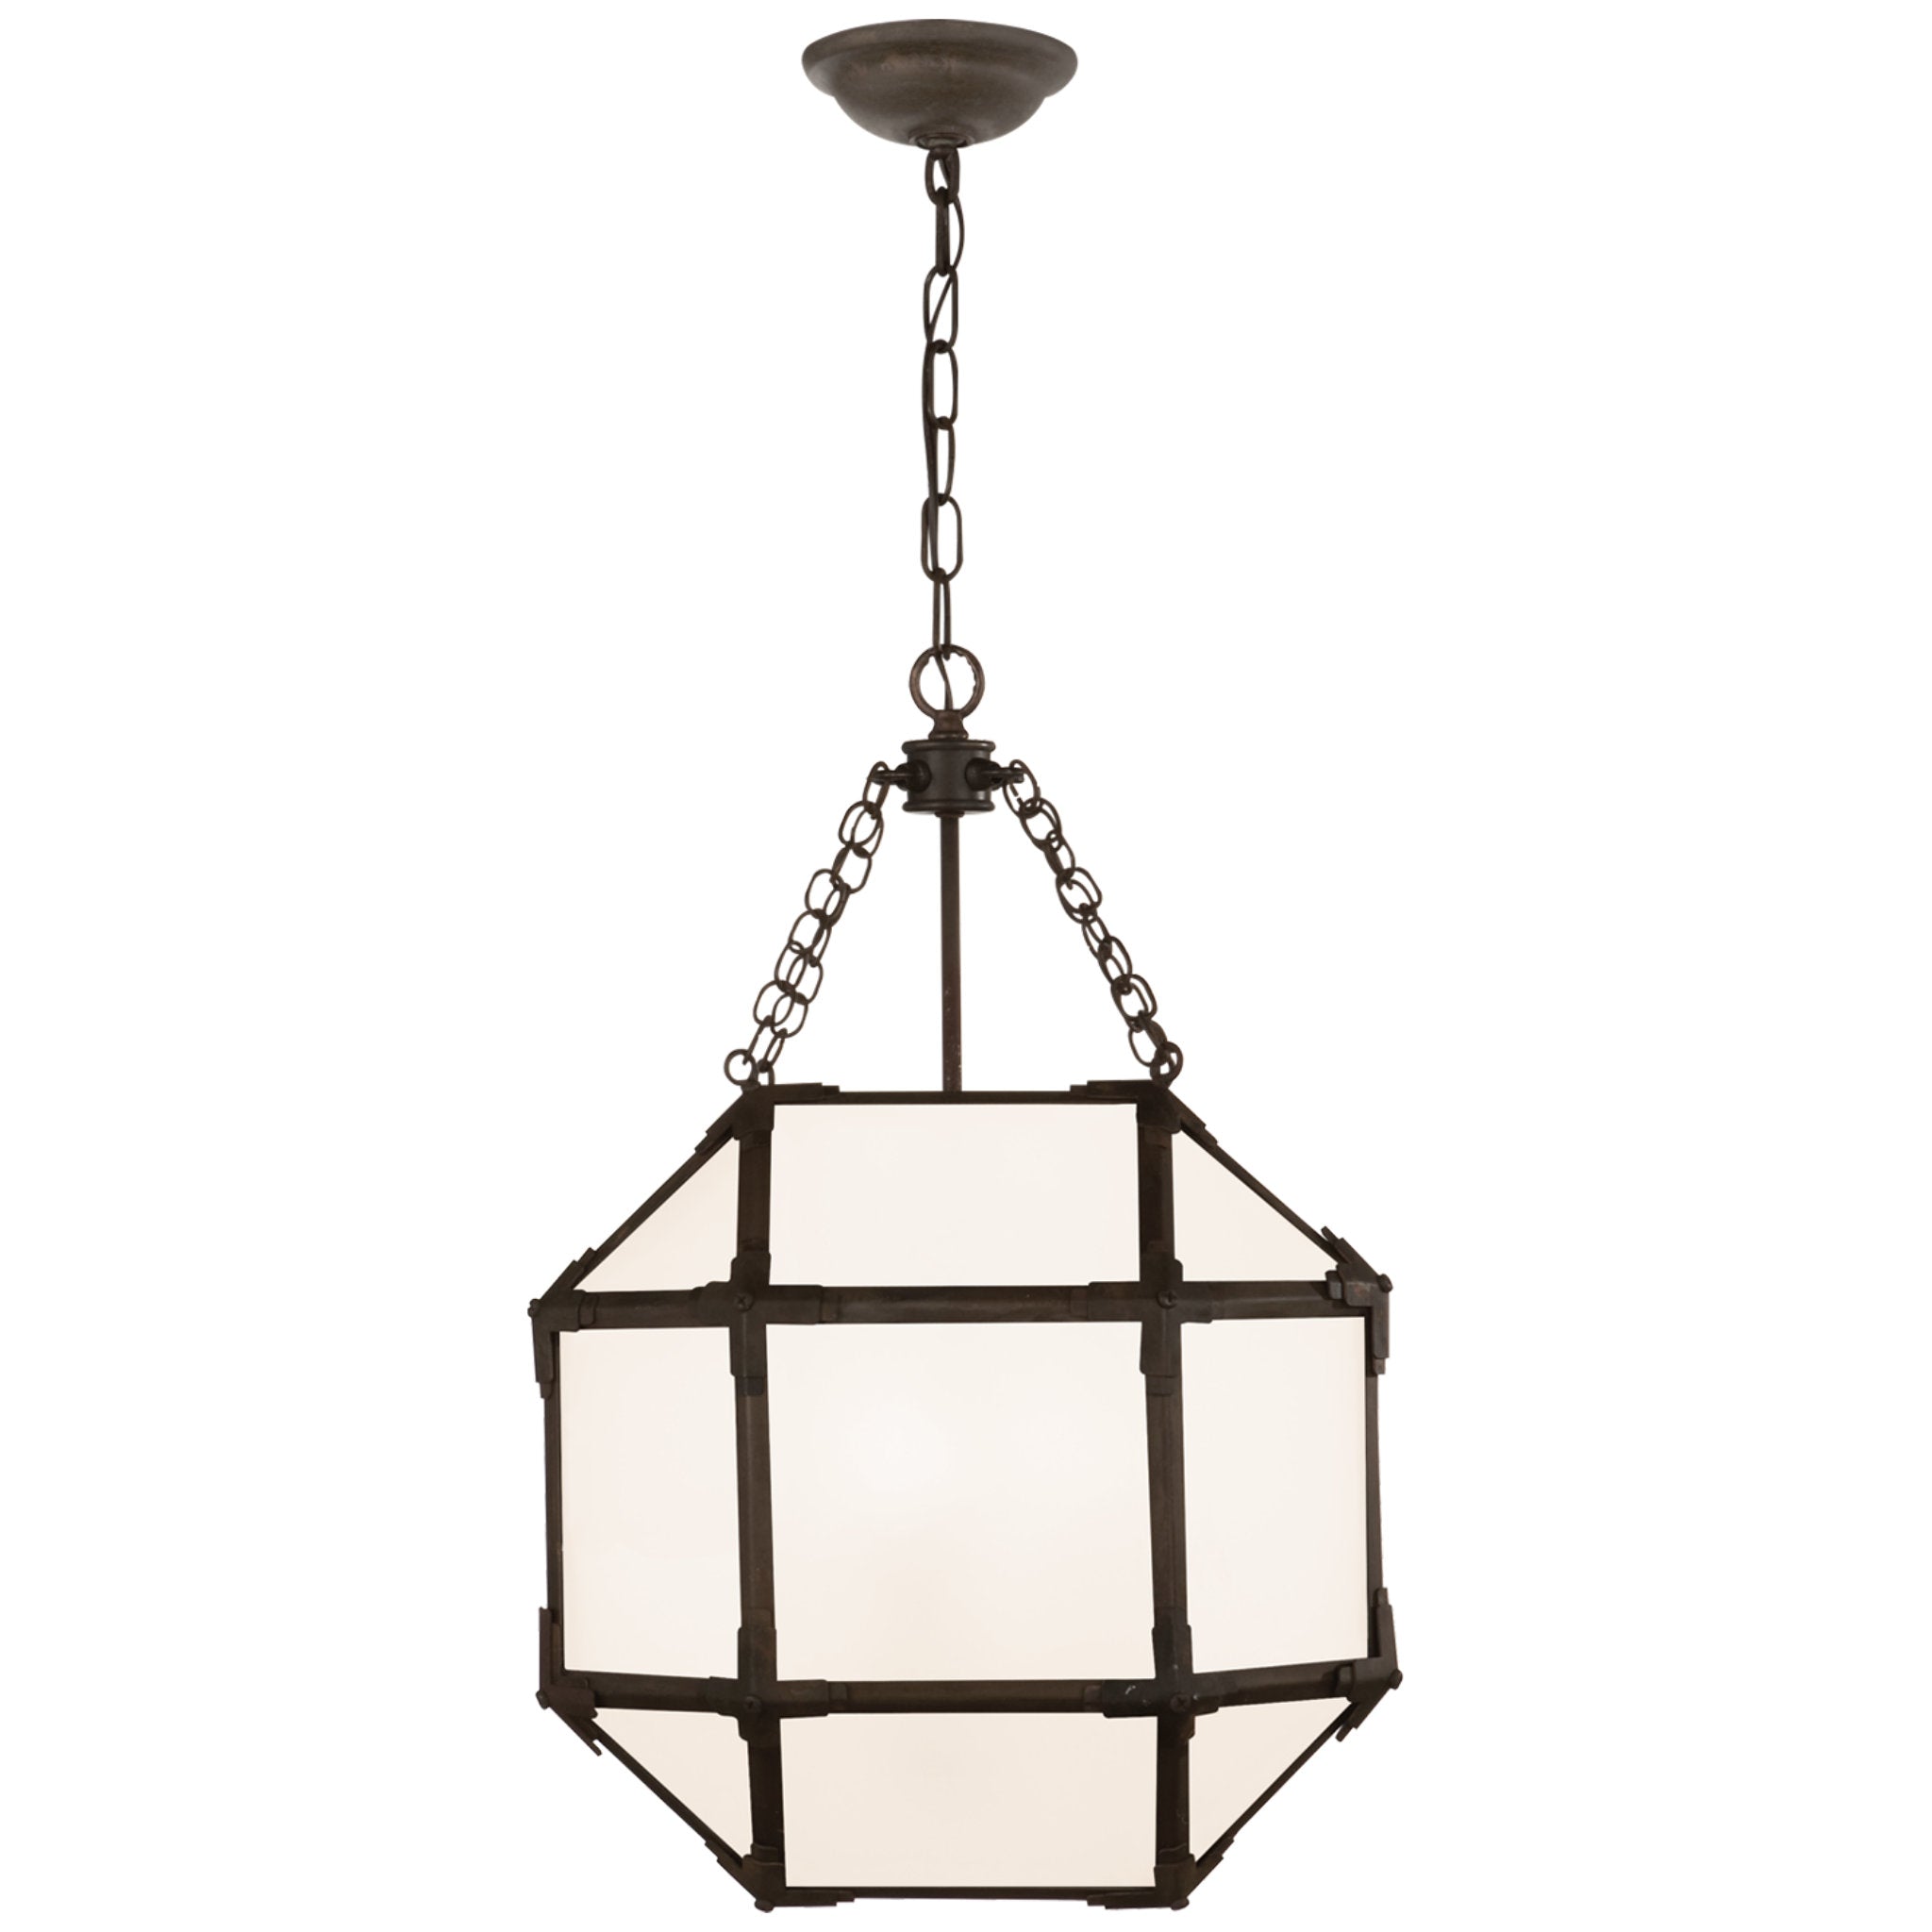 Suzanne Kasler Morris Small Lantern in Antique Zinc with White Glass